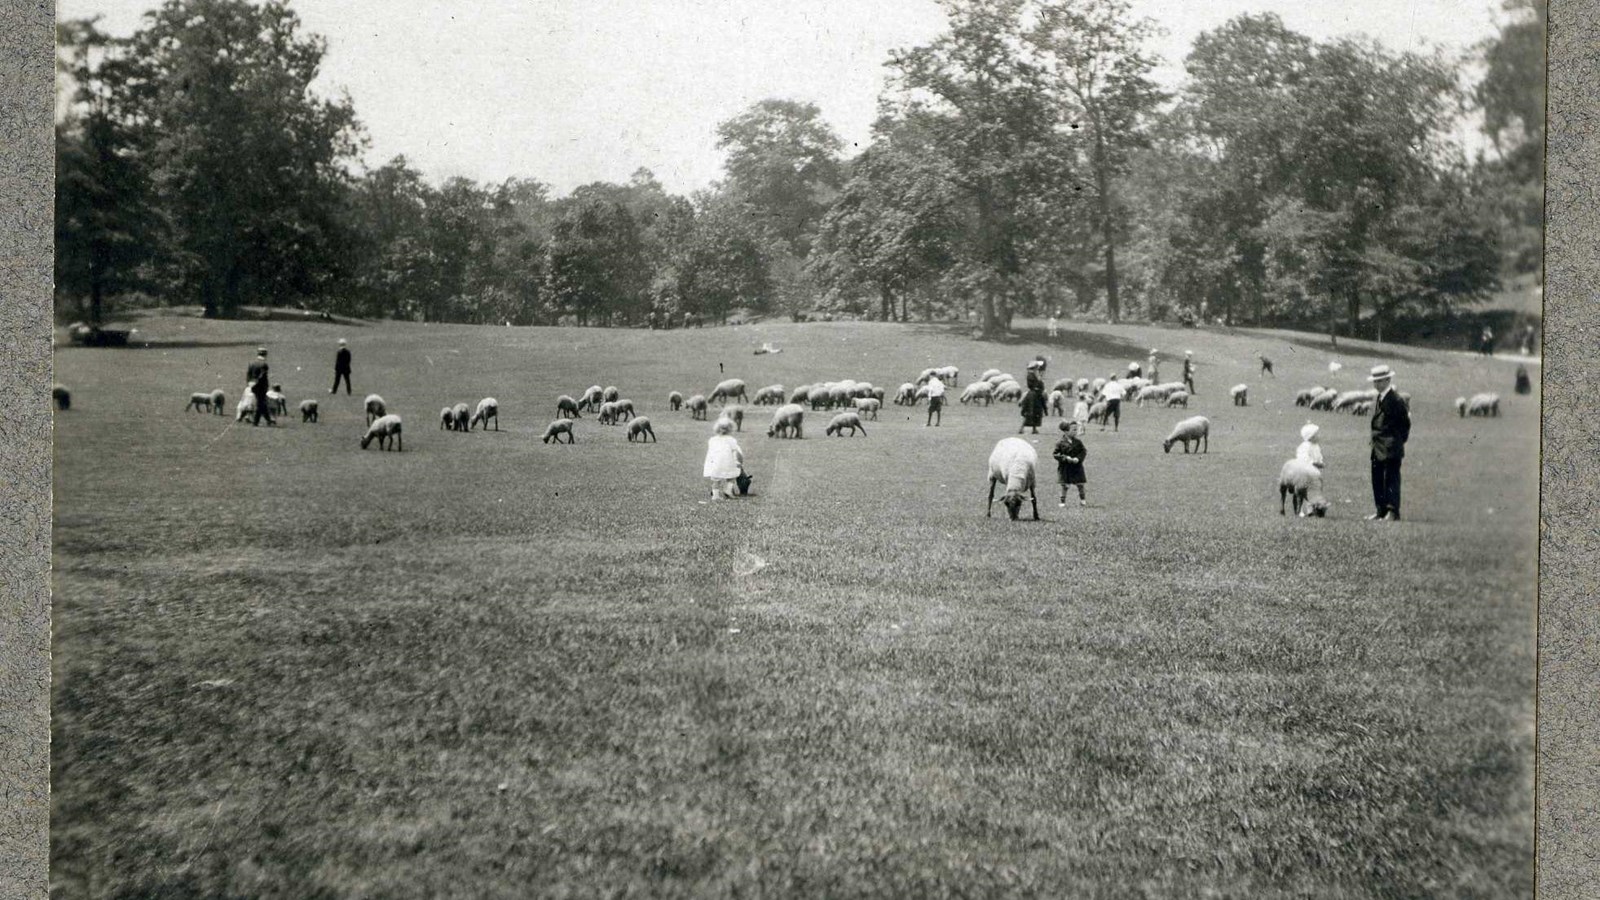 Black and white of grassy area with trees on the edges and people and sheep playing on grass